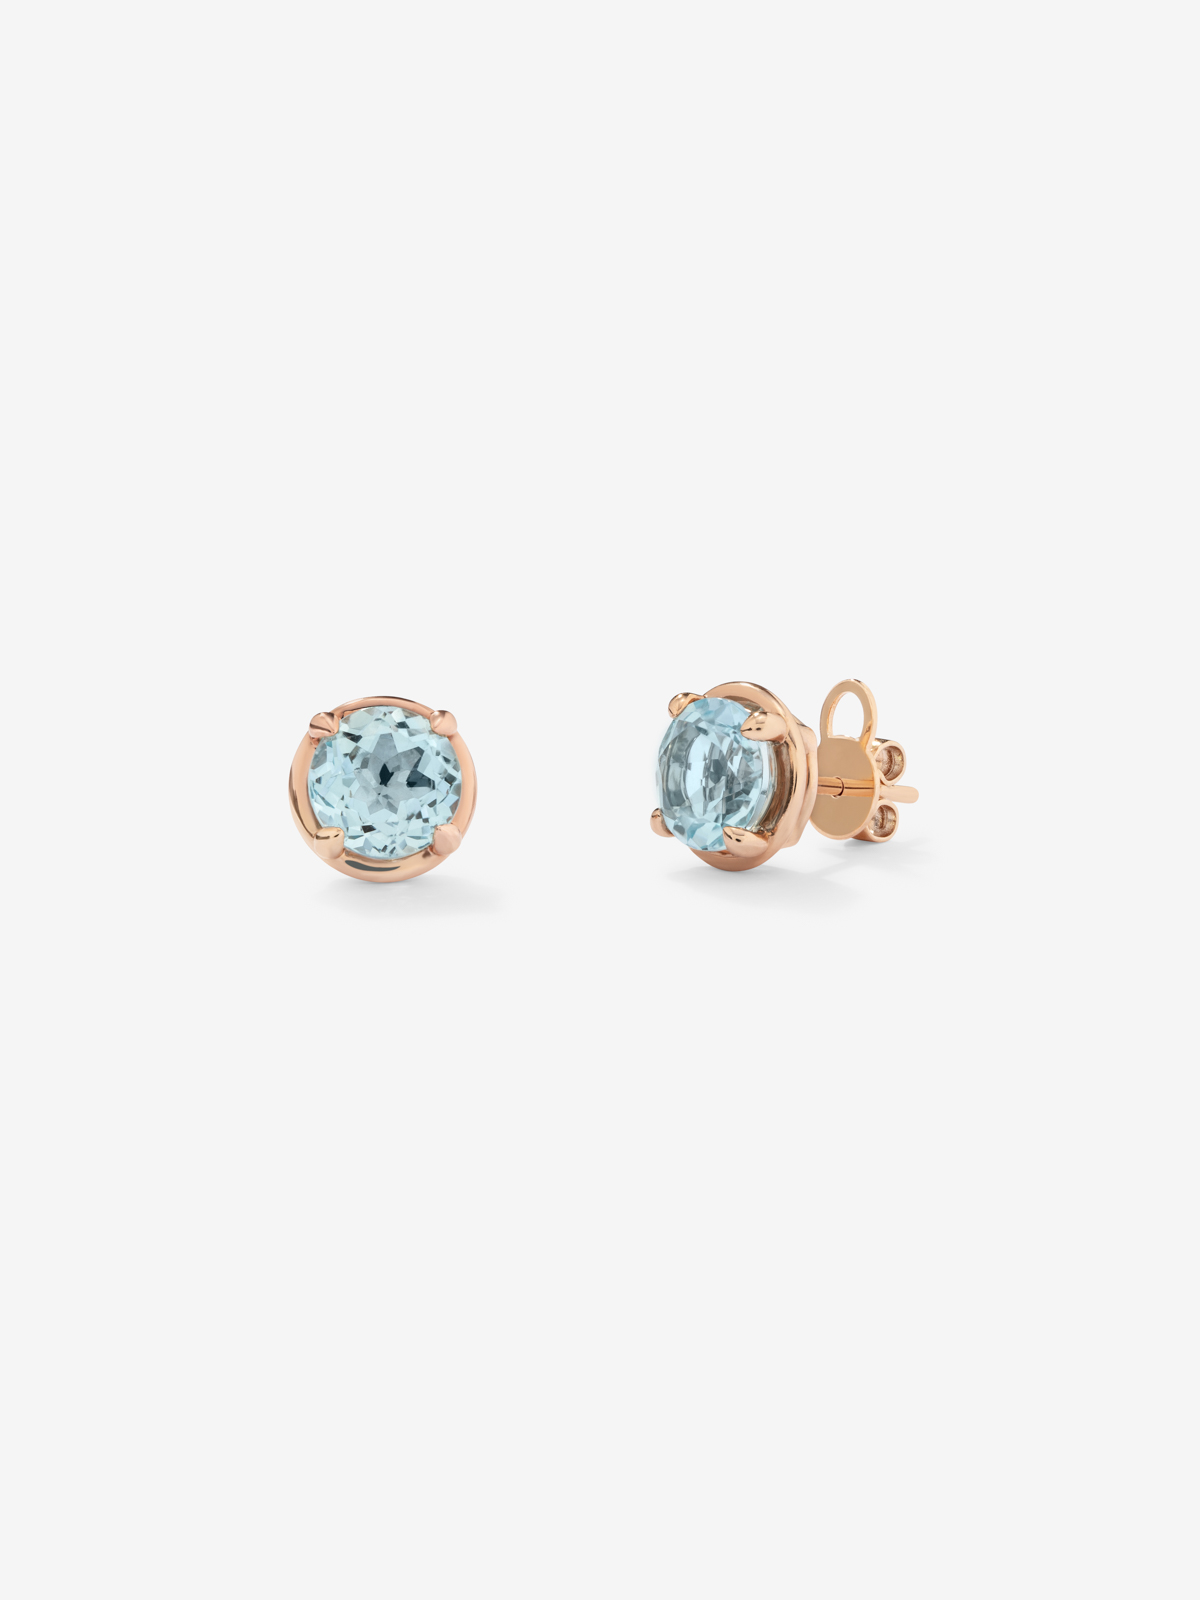 18K pink gold button earrings with Sky blue tod